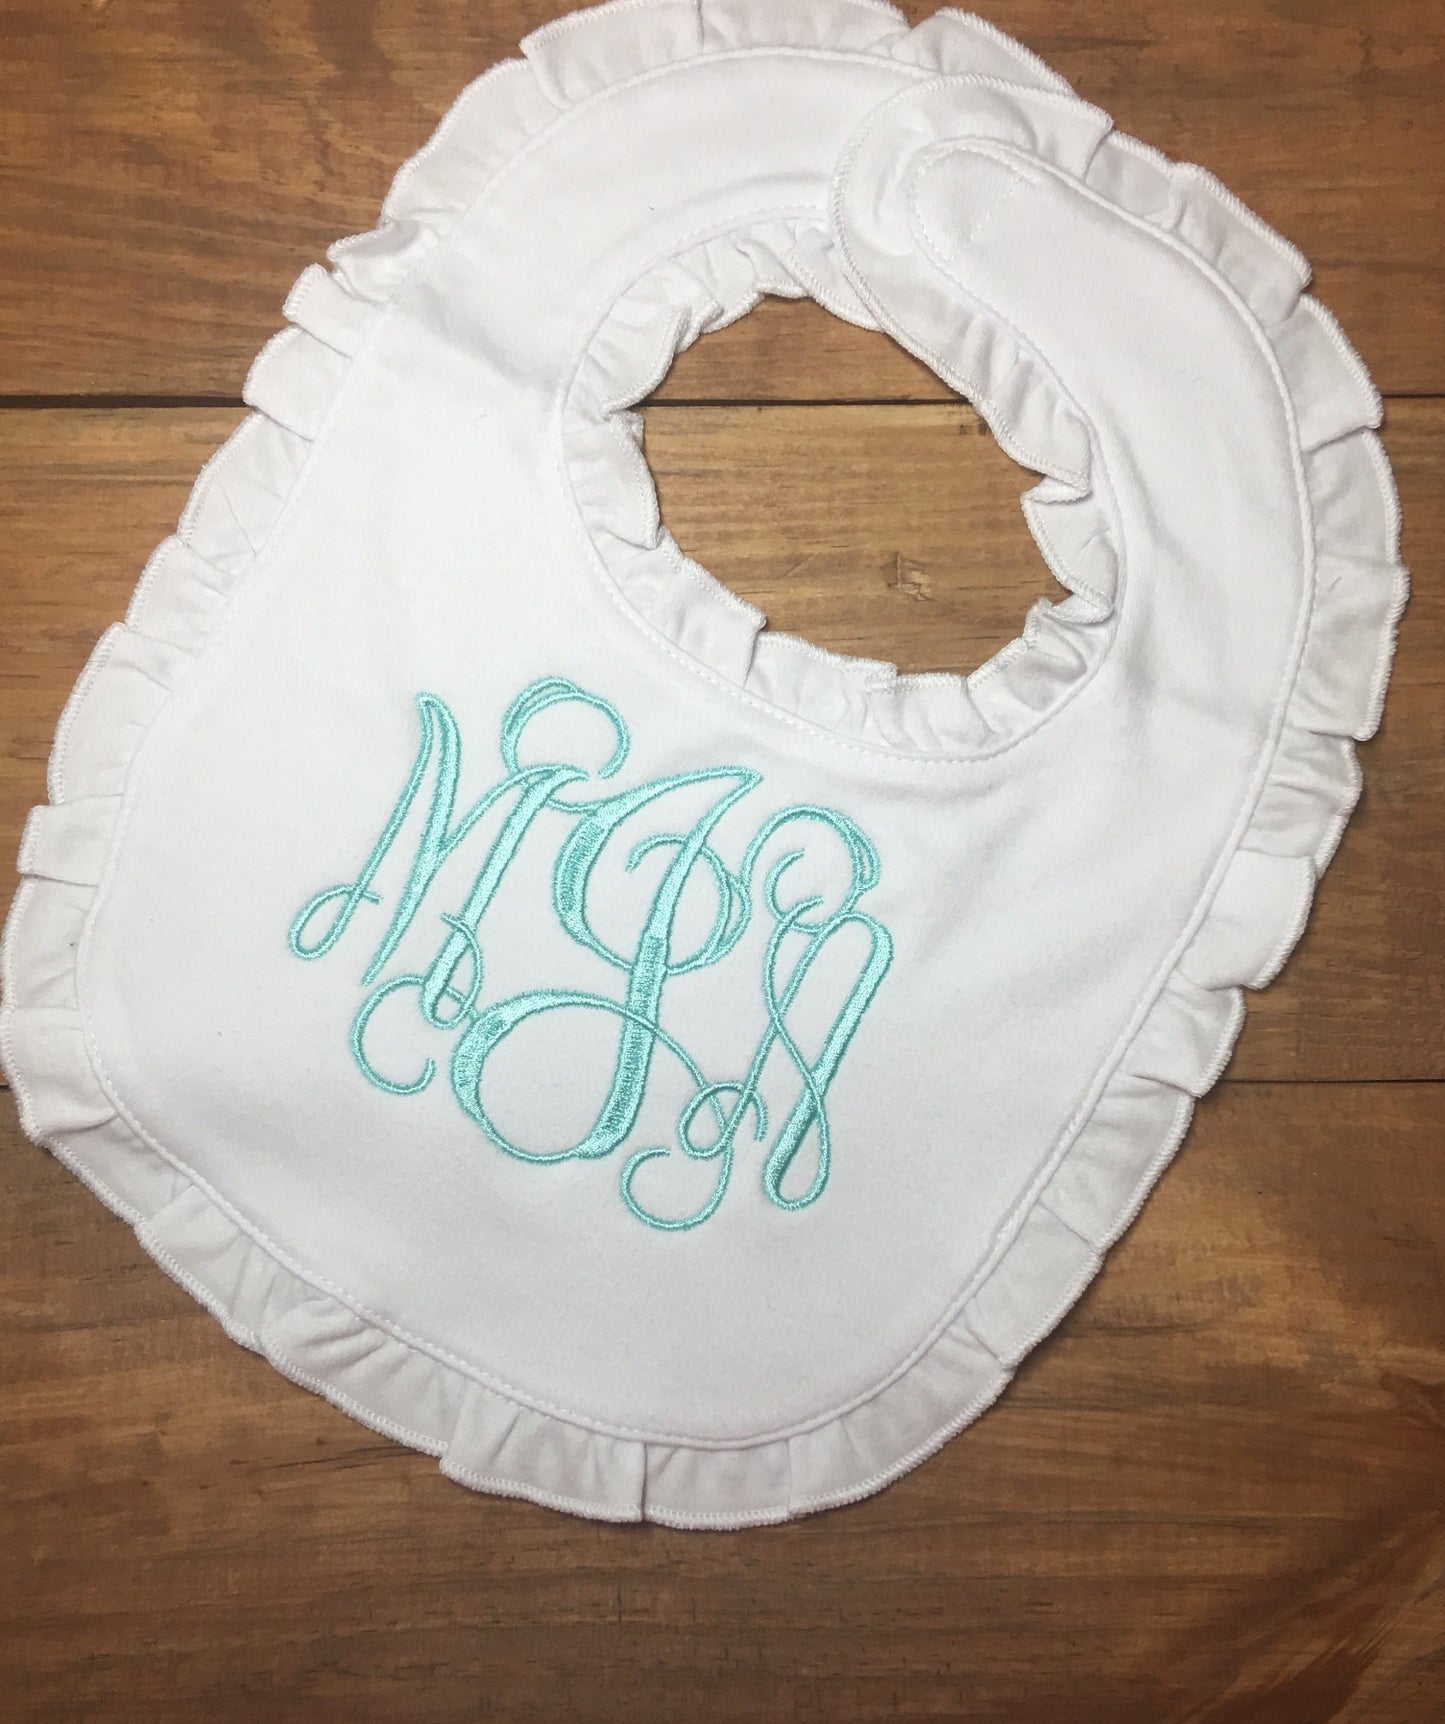 Baby Girls Coming Home Outfit, newborn coming home outfit, newborn clothes, boutique baby, monogrammed ruffle baby gown and bib, mint